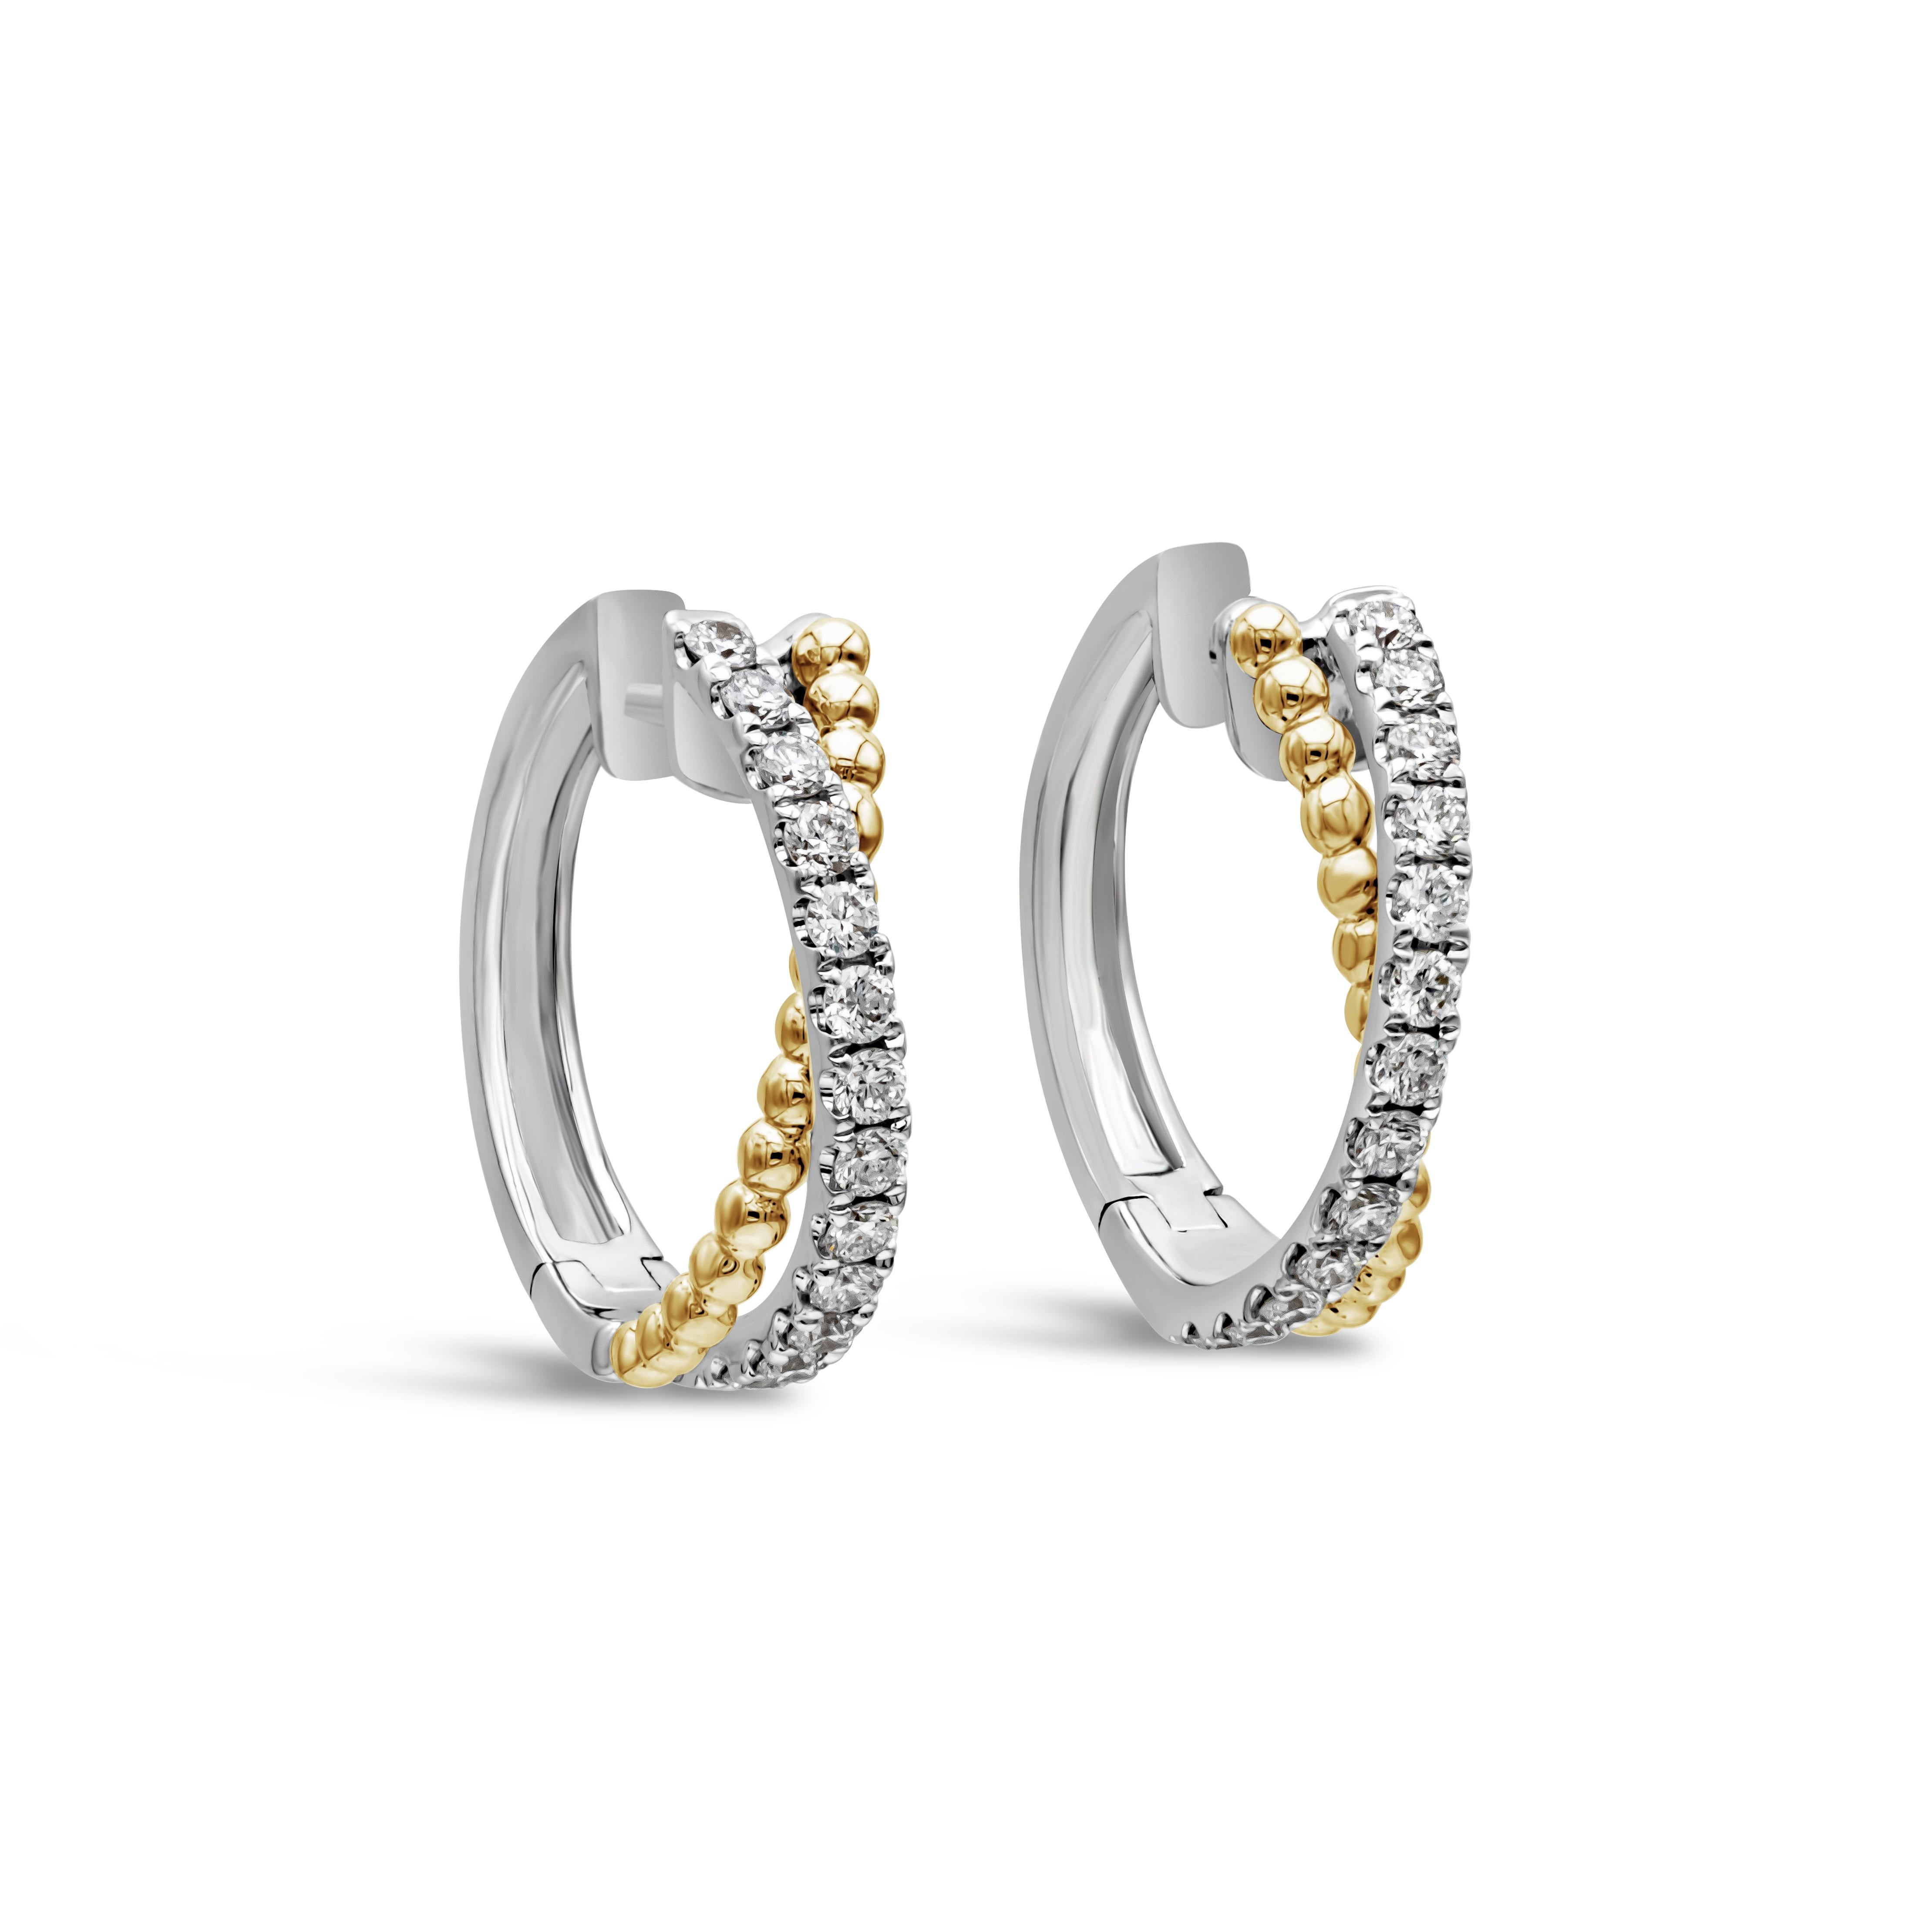 This pair of earrings shows a unique criss-cross design of a row of diamonds and a row of round yellow gold balls. The brilliant round diamonds weigh a total of .42 carats. Mounted in a classic four prong setting, lined up in a row. Earrings made in